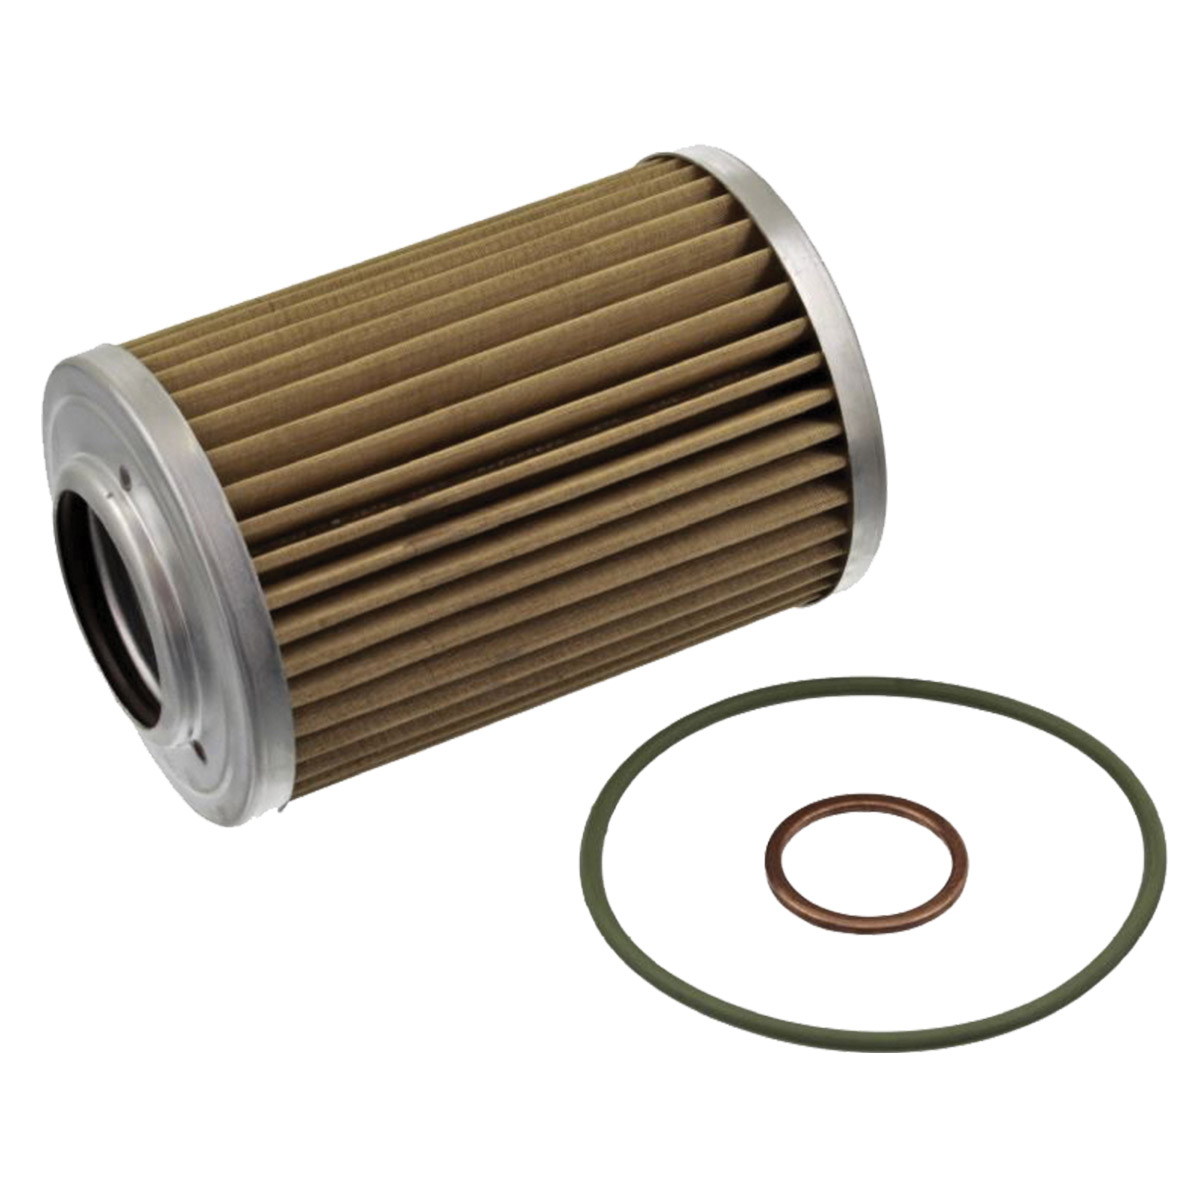 Auto Trans Filter to suit various models